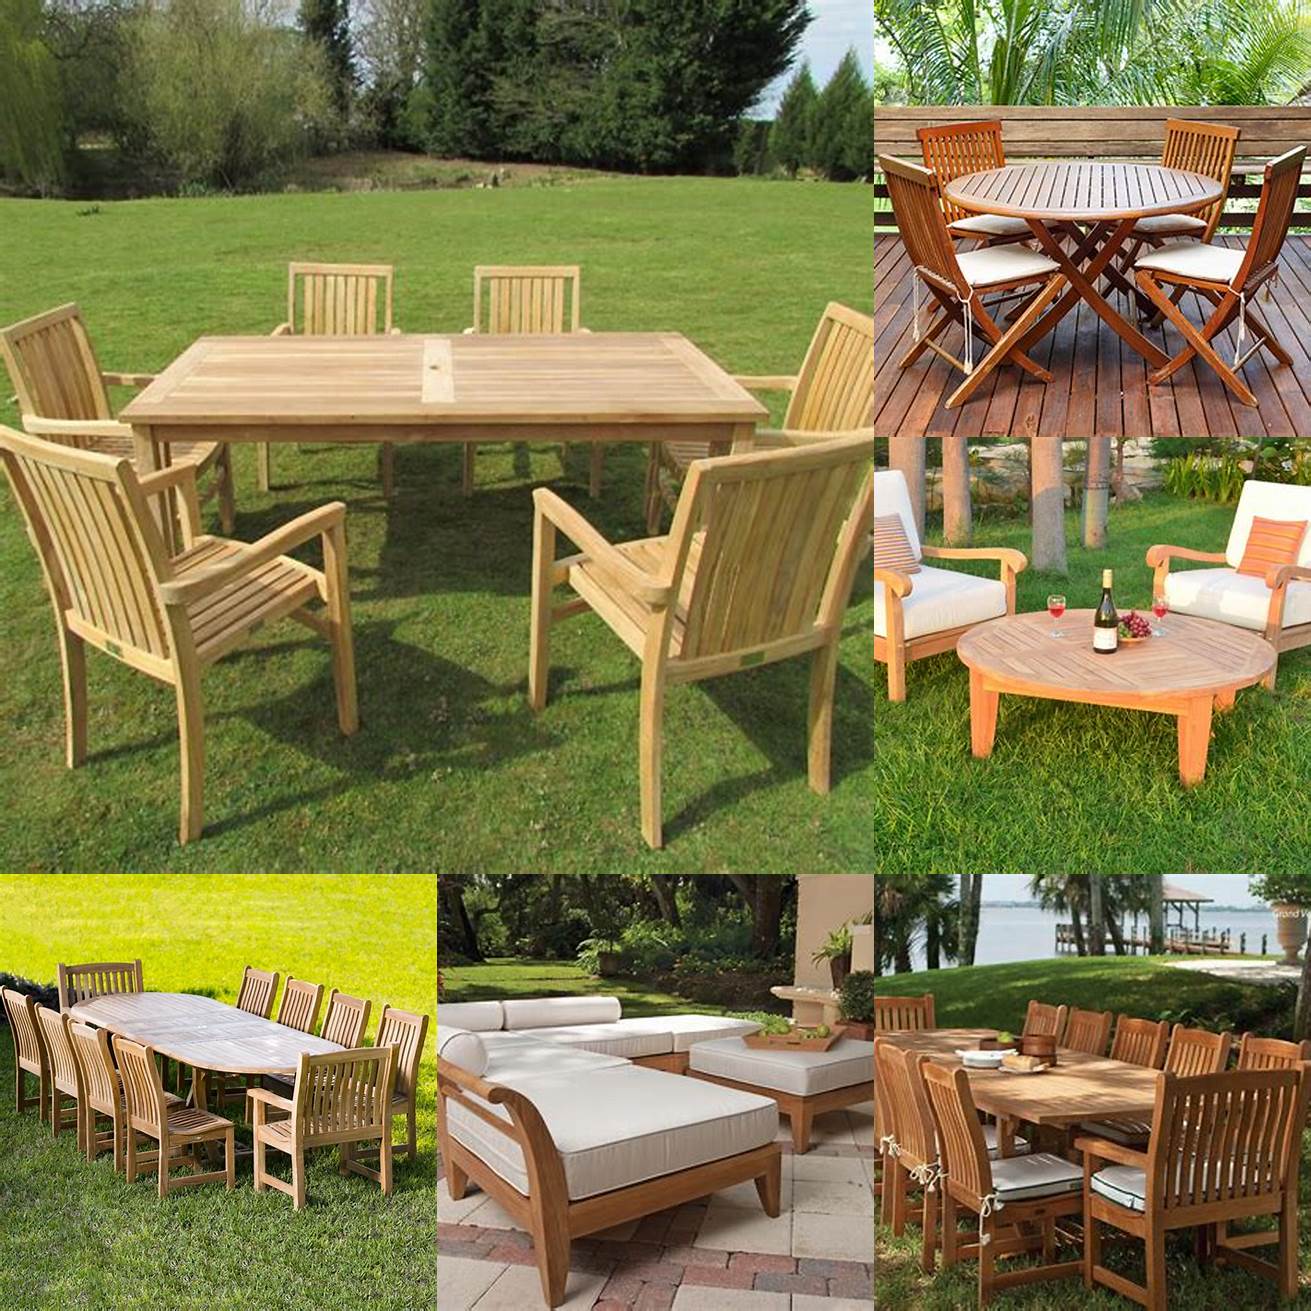 Beauty and style of teak wood